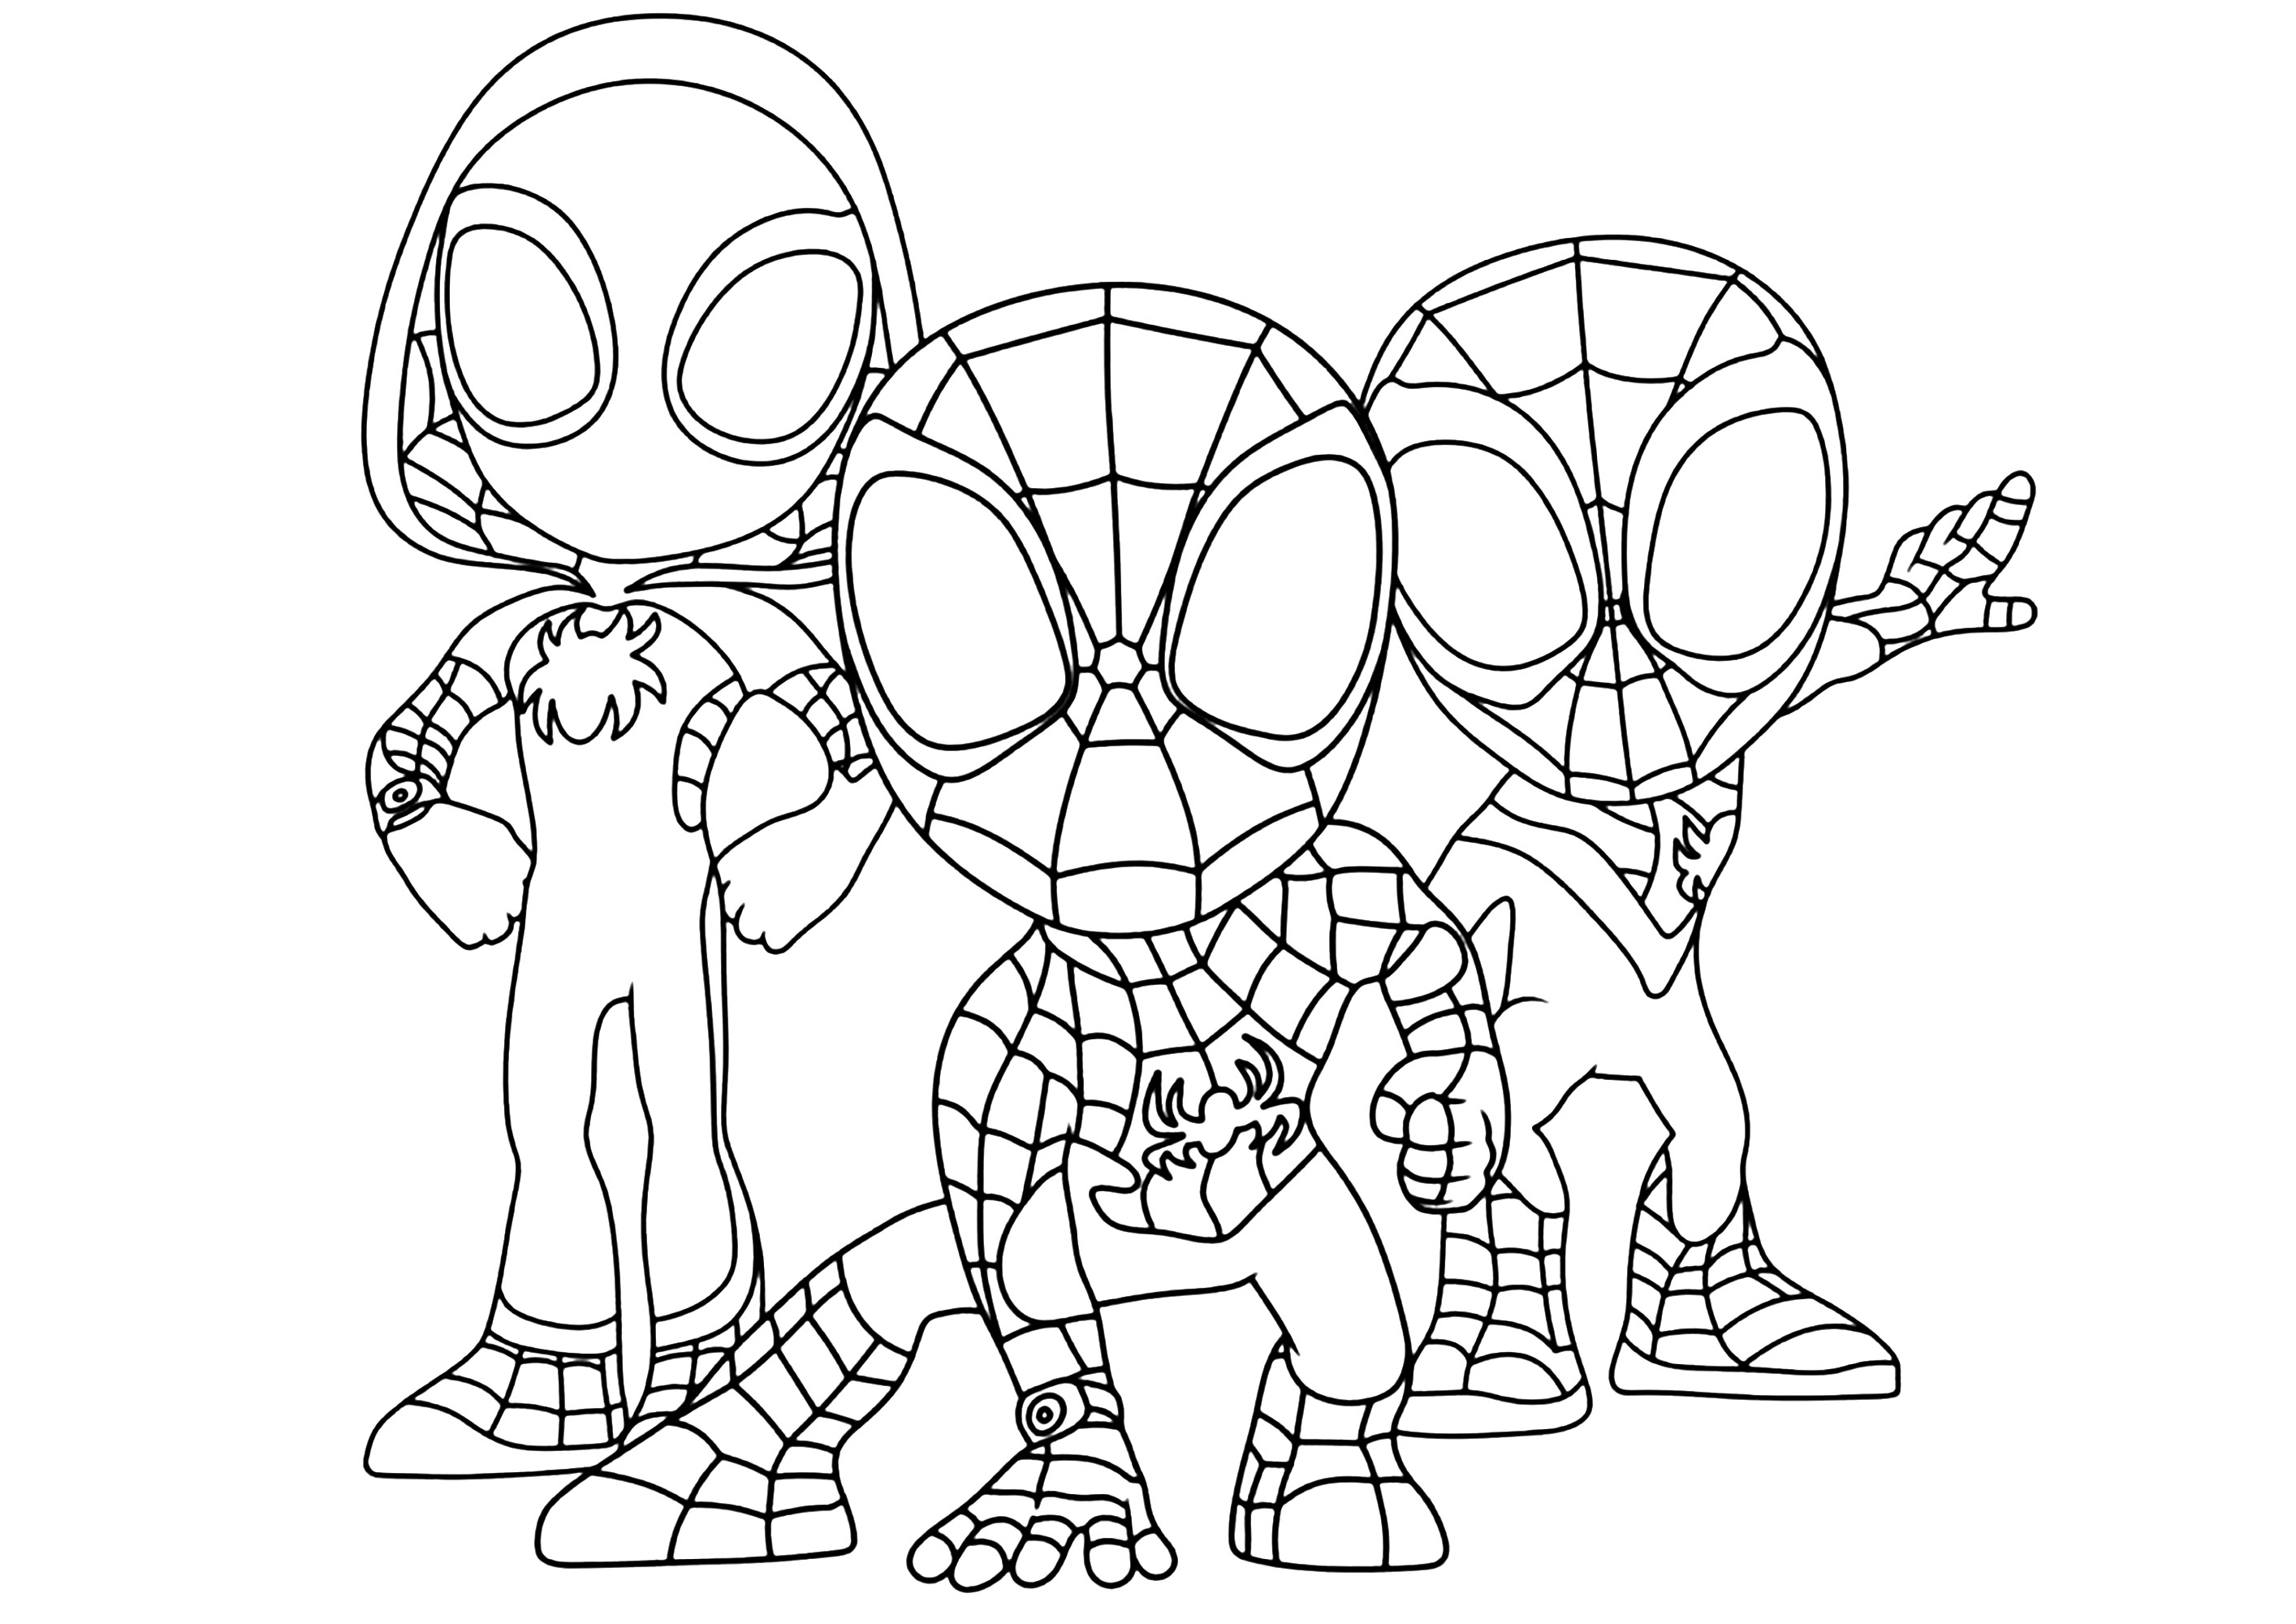 Spider Verse characters in Kawaii mode ...